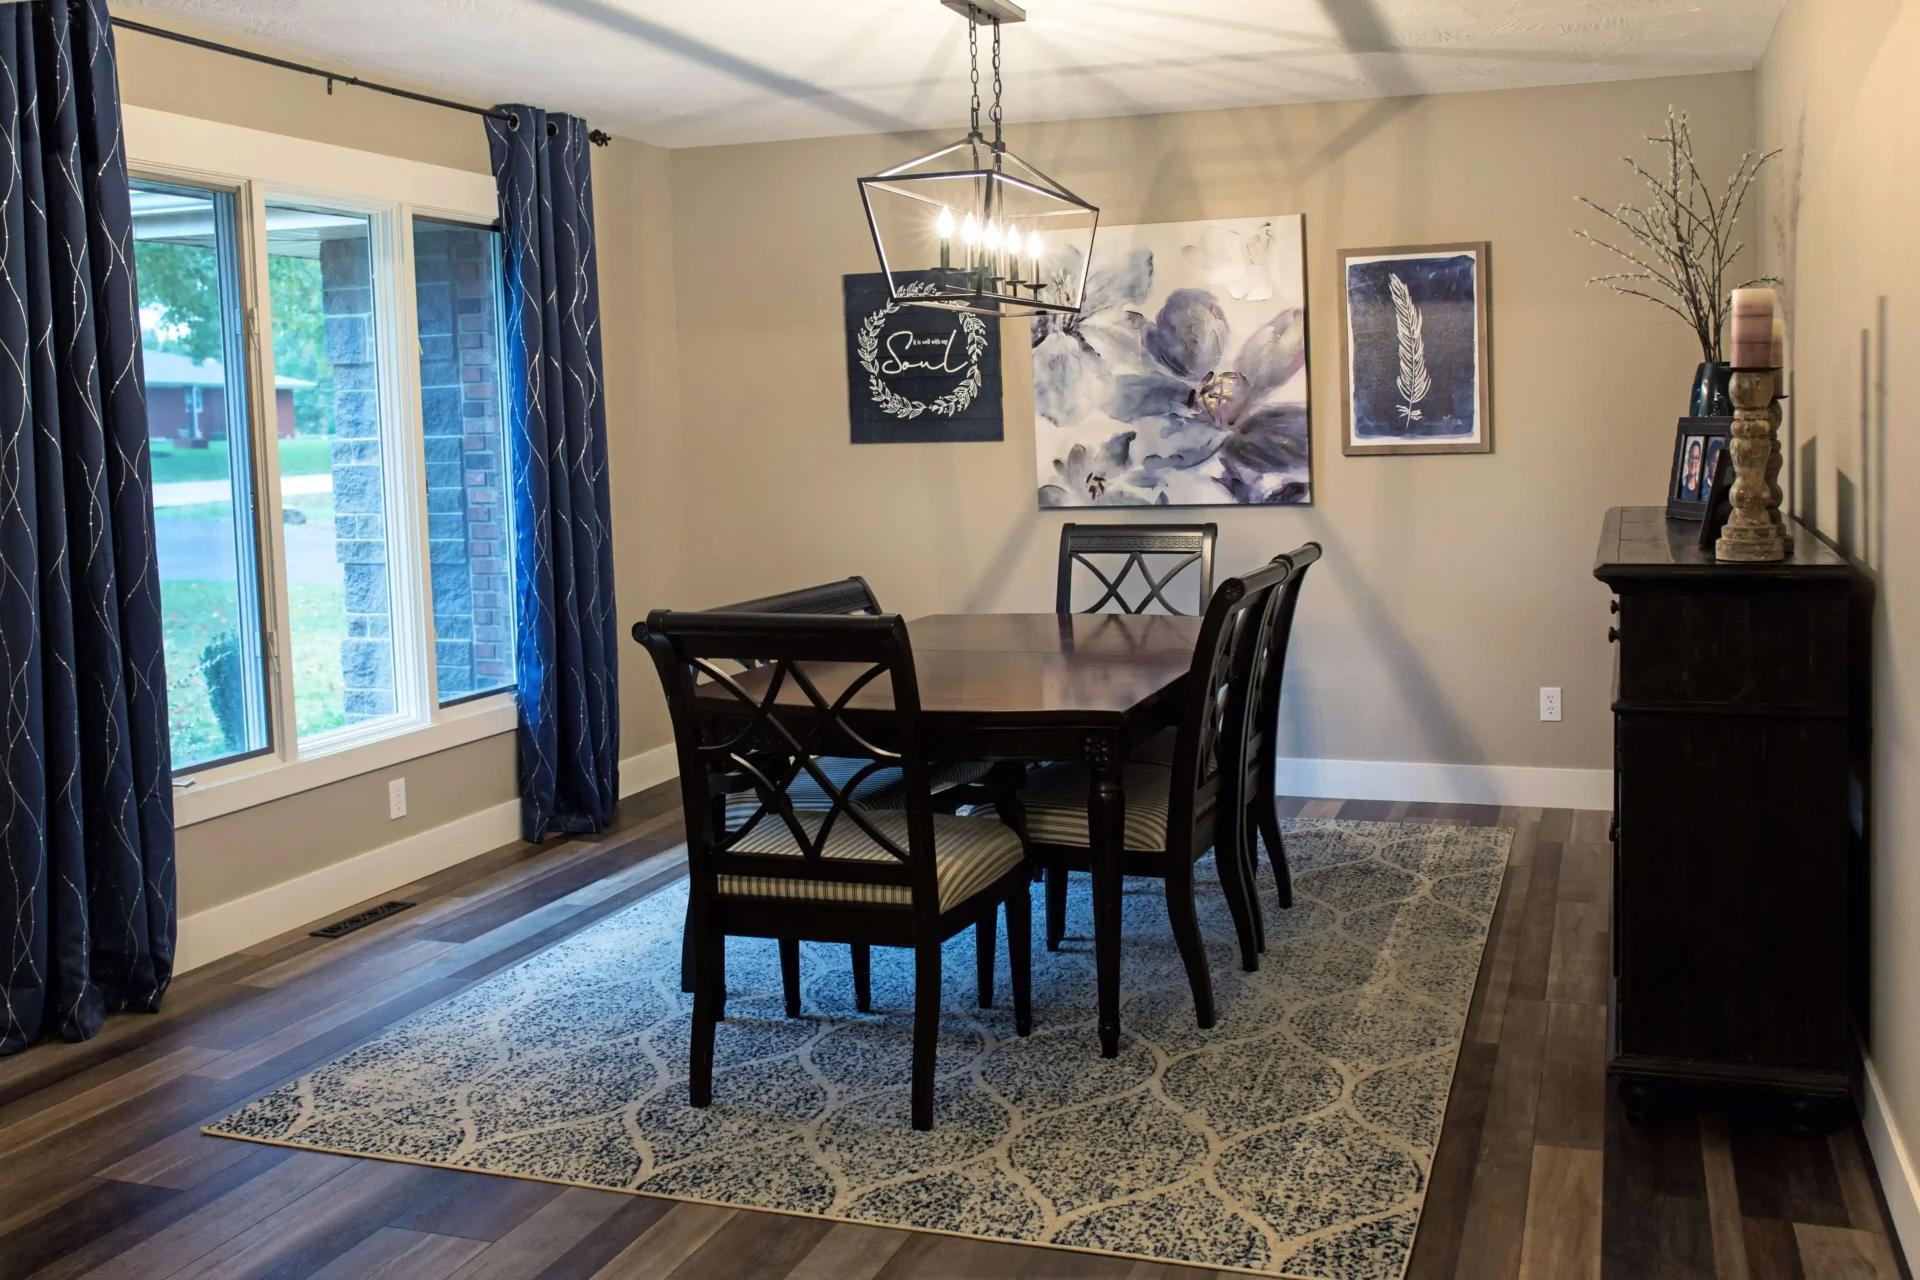 A stylish dining room after renovation image.